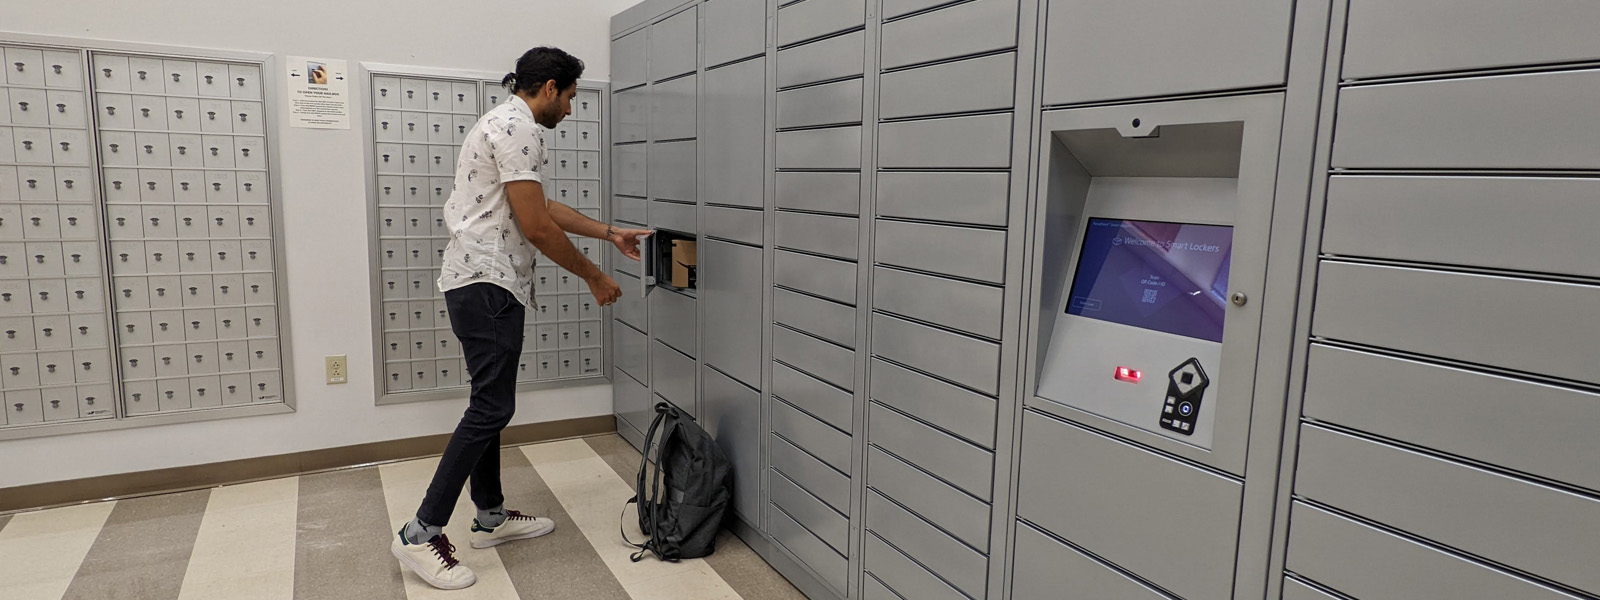 Student getting a package out of a mail locker.